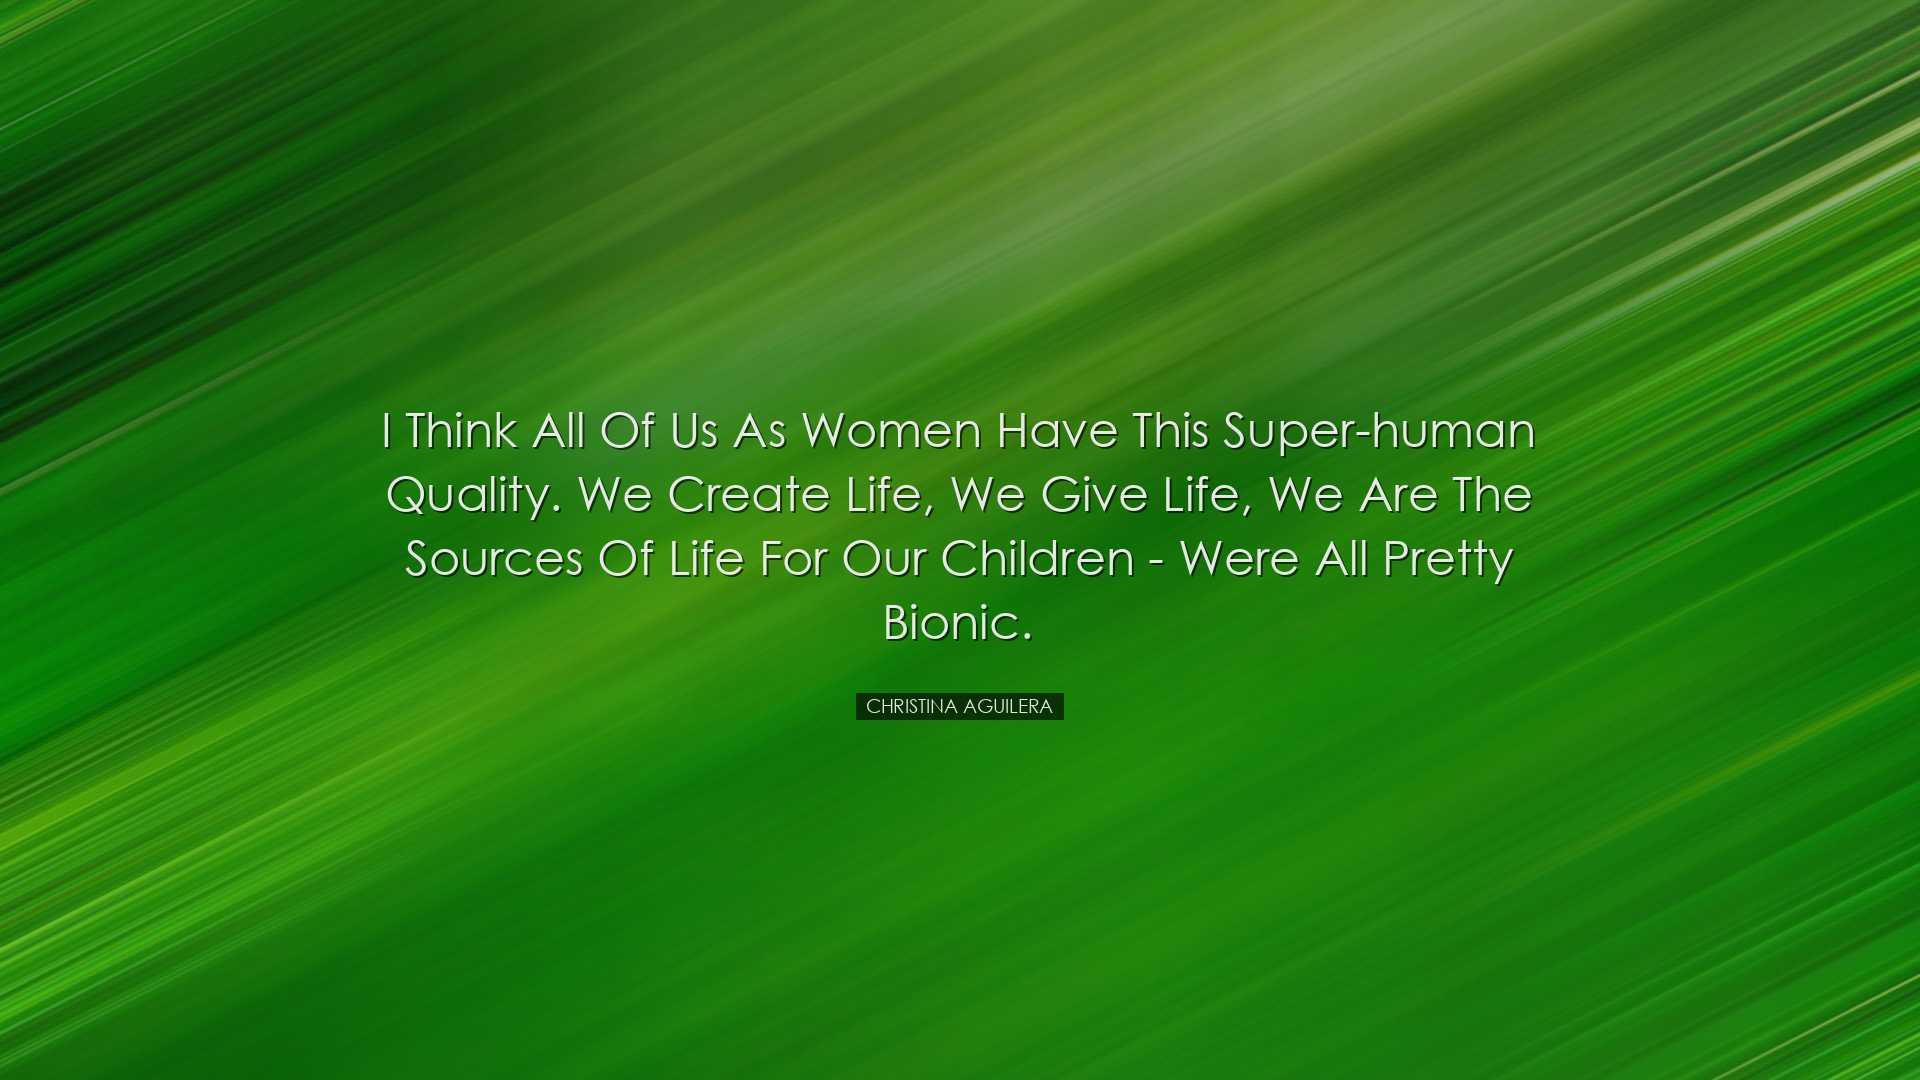 I think all of us as women have this super-human quality. We creat